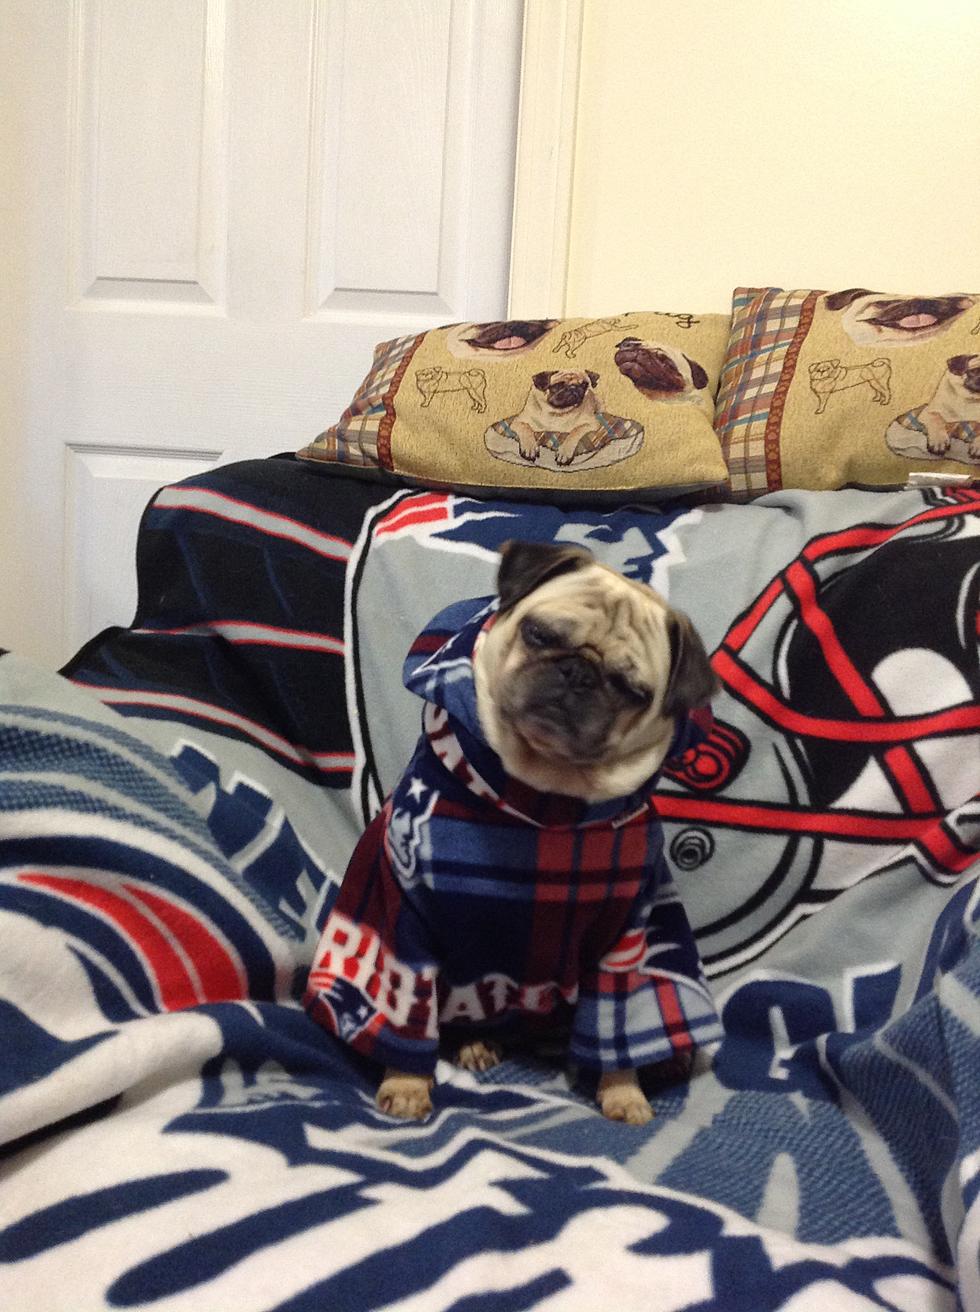 Pets Pride: Rosie Looks Cozy in Her New England Football Outfit